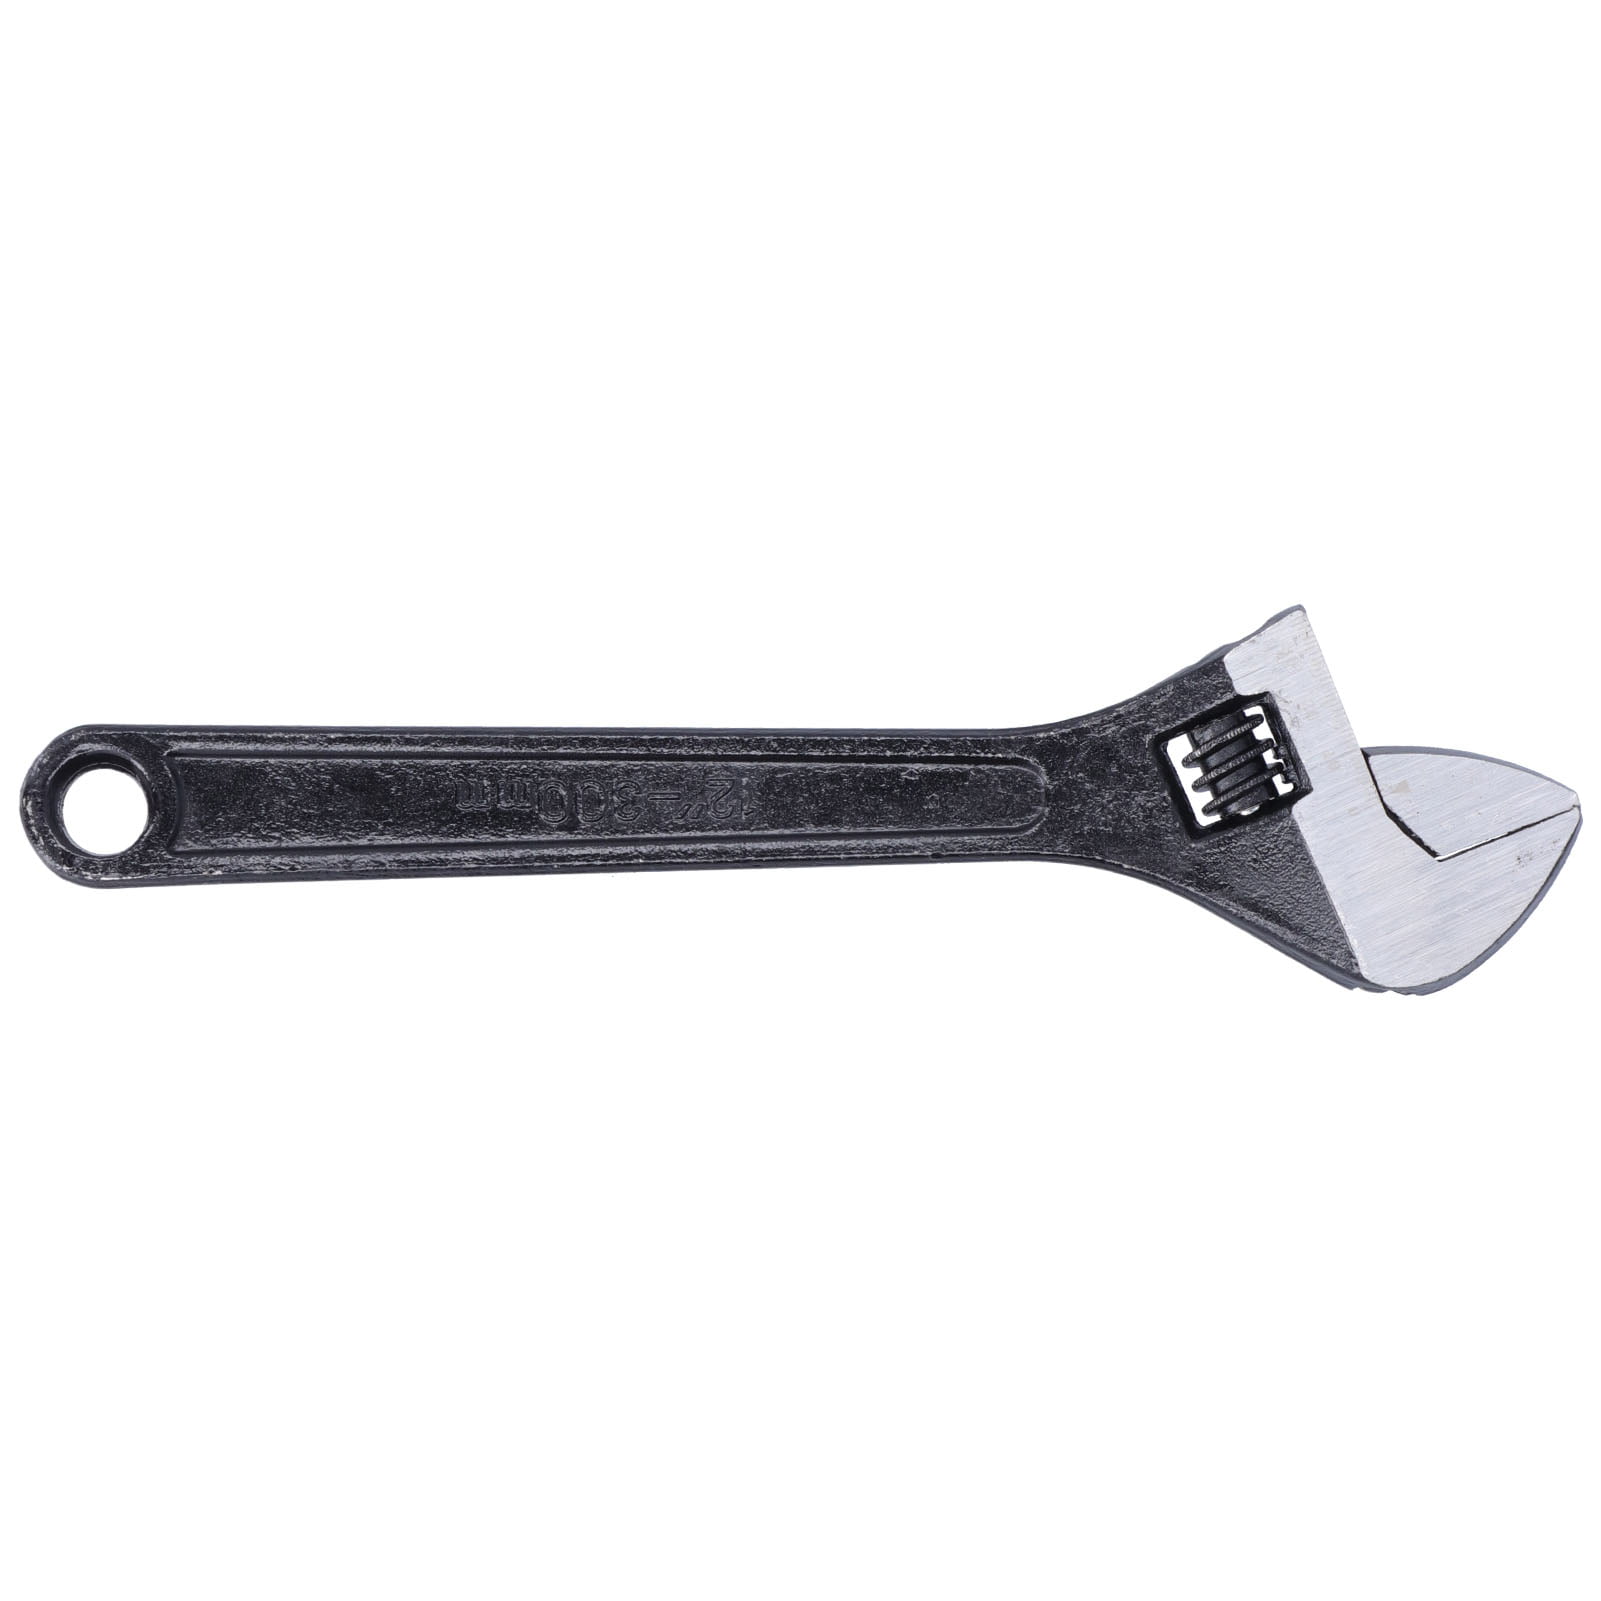 Adjustable spanner wrench 300mm chrome vanadium 12" softgrip handle,with scale 